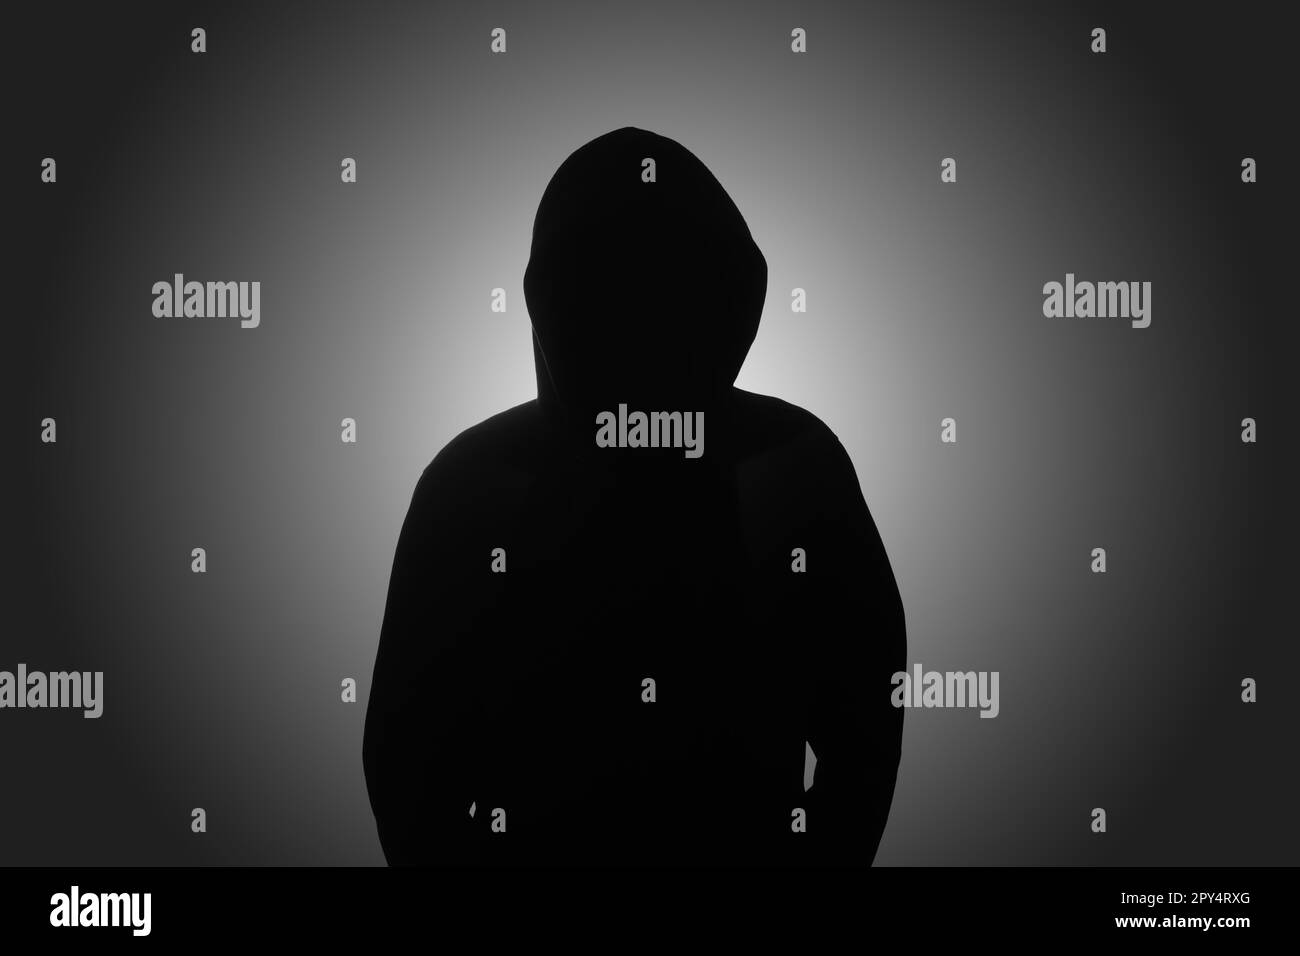 Mysterious man wearing black hoodie standing against dark background. Hacker, crime, and cyber security concept. Stock Photo